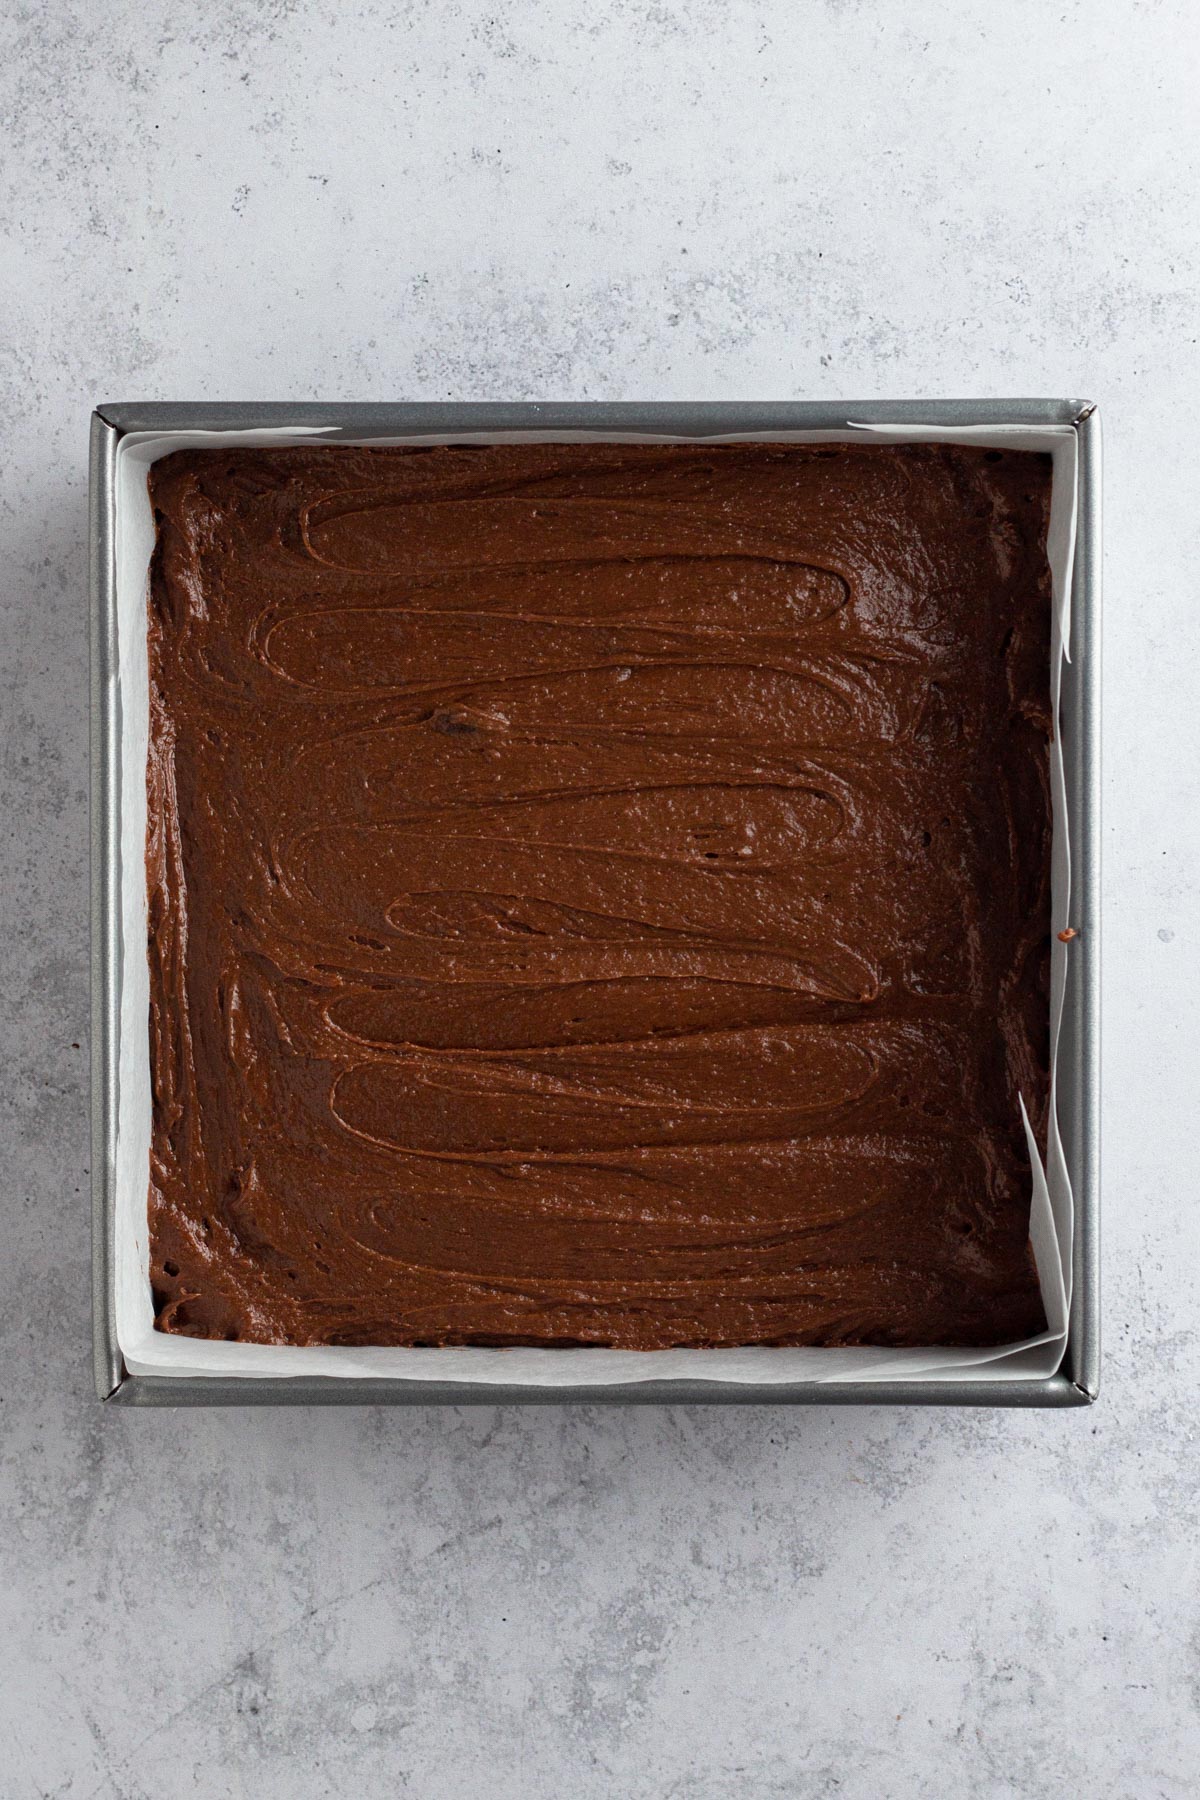 Brownie batter in a square metal pan lined with parchment paper.